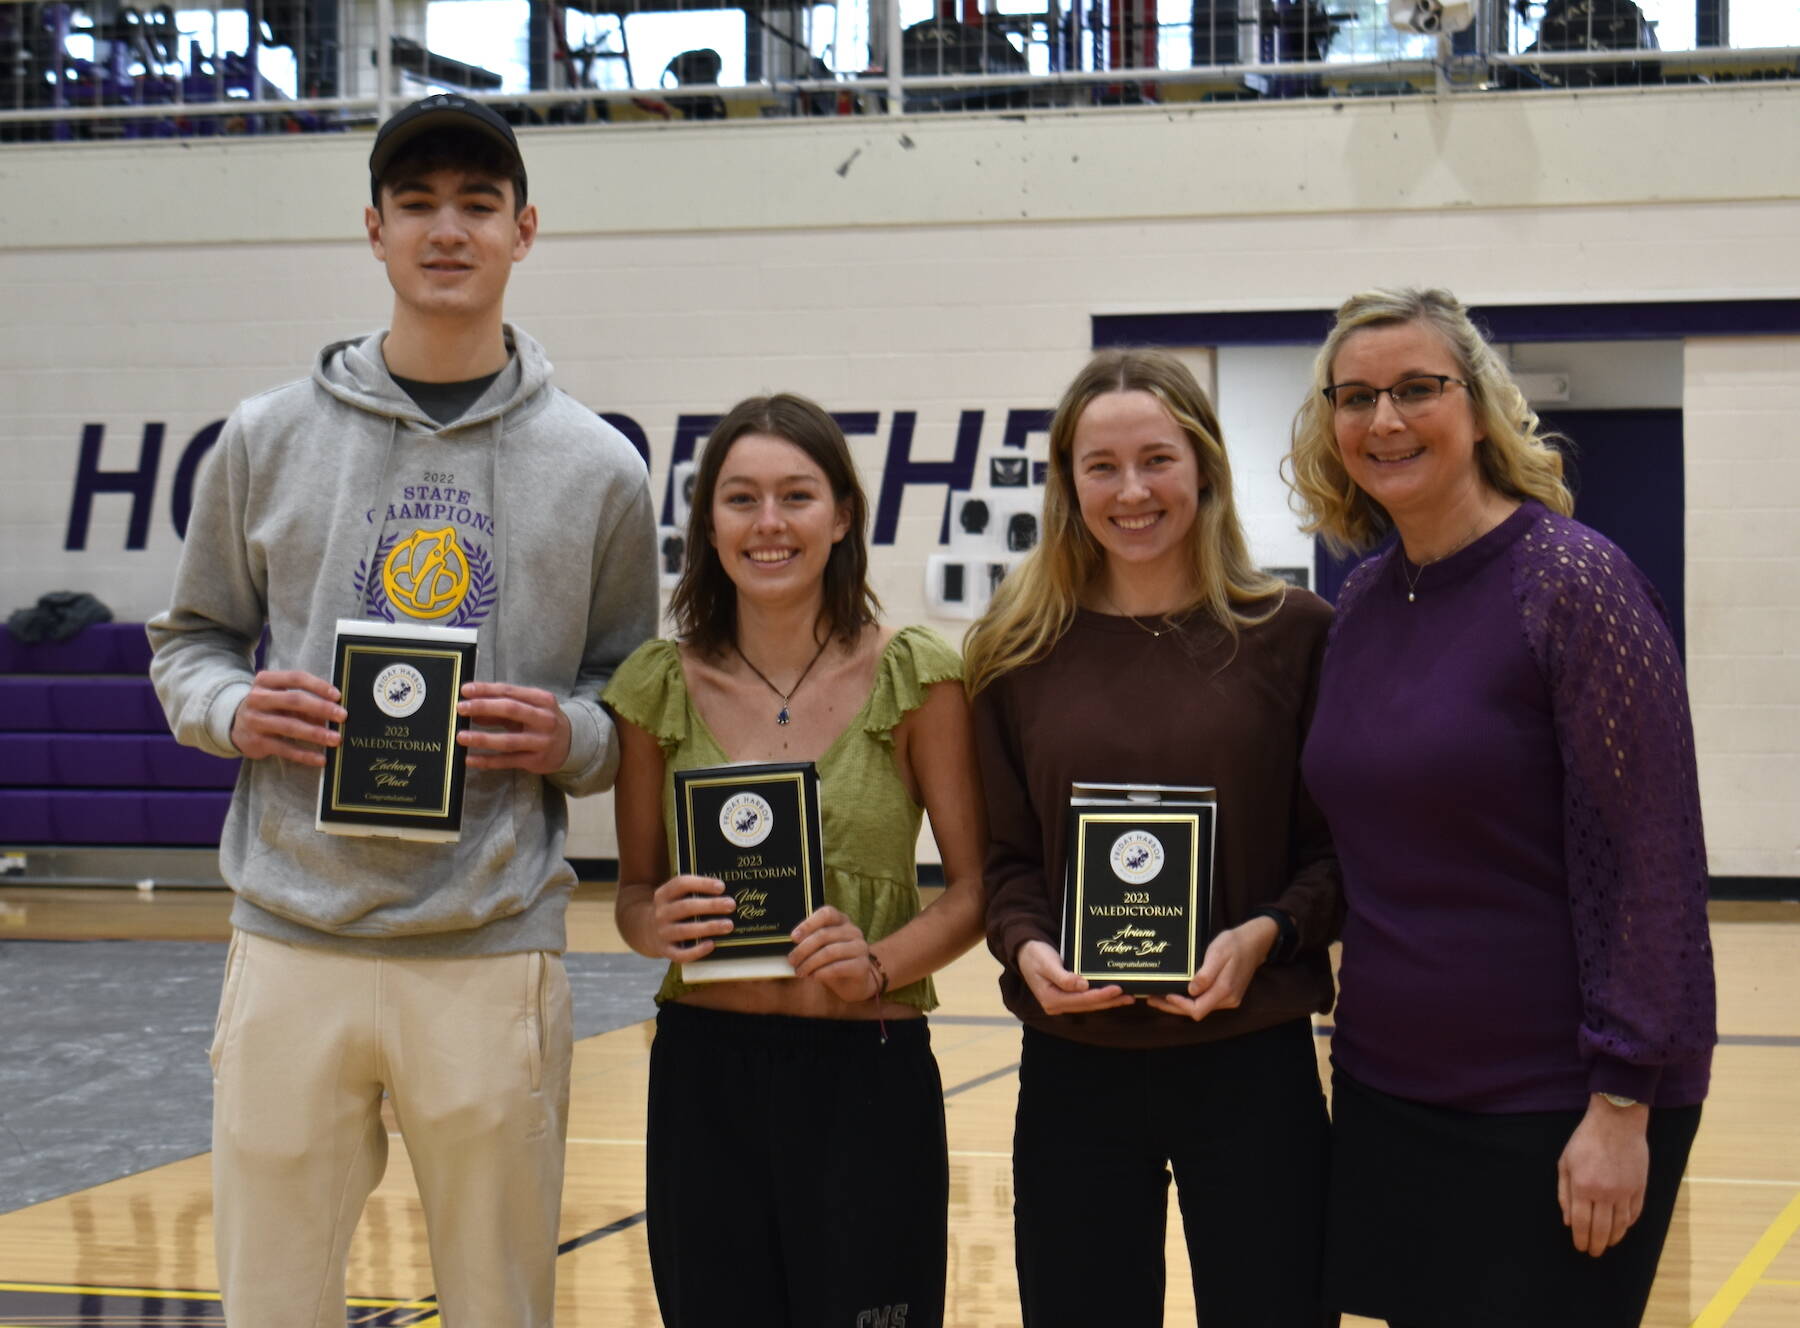 Staff photo by Kelley Balcomb-Bartok
Friday Harbor High School Co-Valedictorians Zachary Place, Islay Ross, and Ariana Tucker-Belt were presented honorary awards by Principal Andrea Hillman during the FHHS Celebration of Academics event held March 10 in the Turnball Gym.